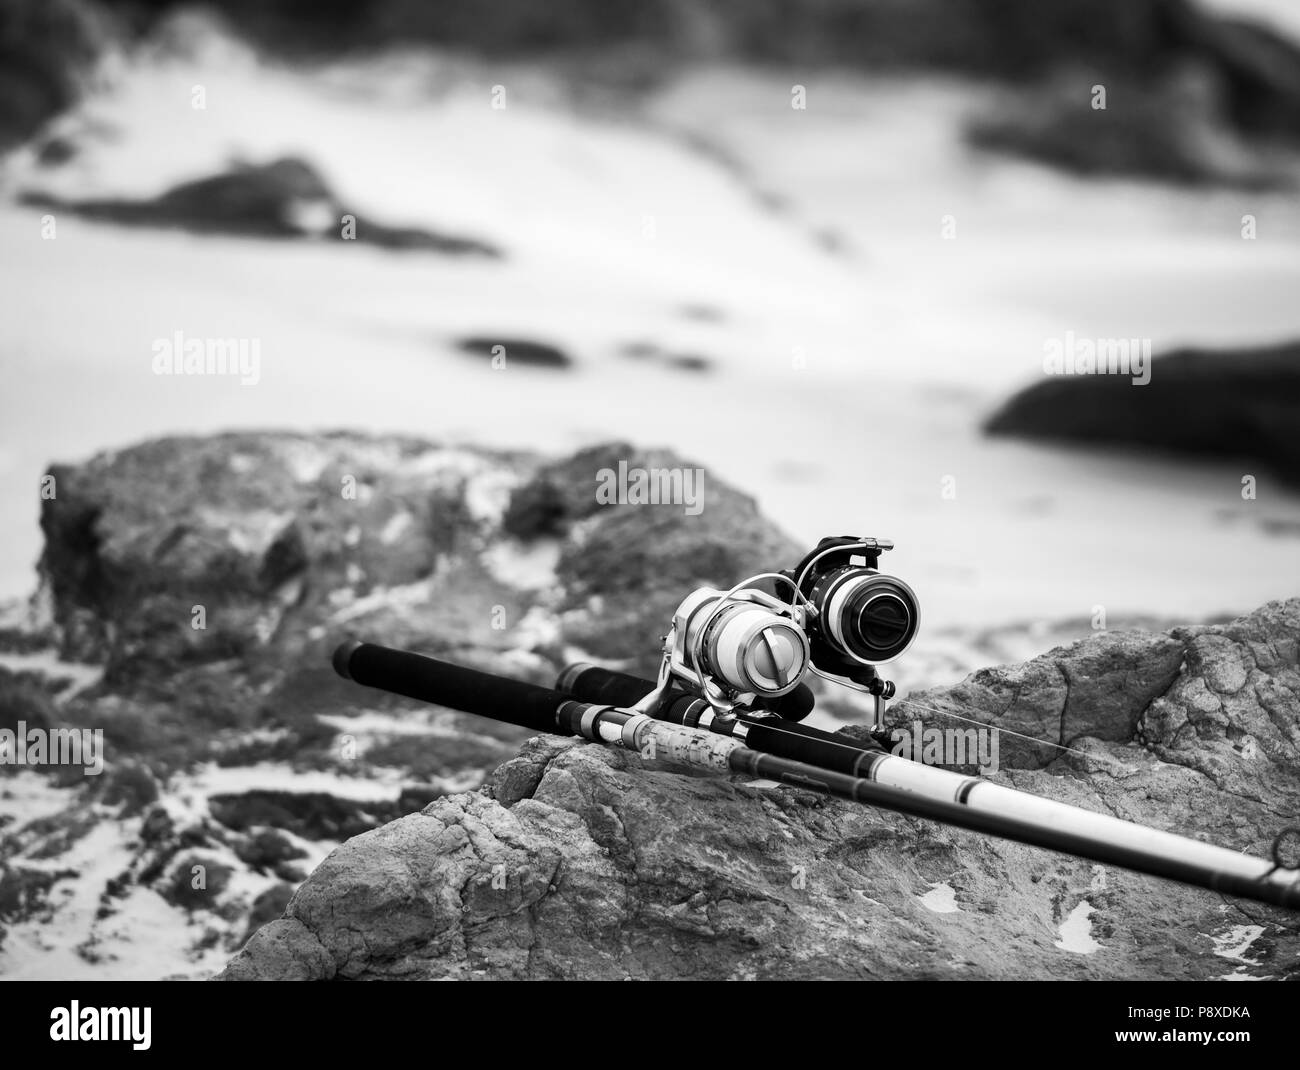 Fish on rod Black and White Stock Photos & Images - Page 2 - Alamy